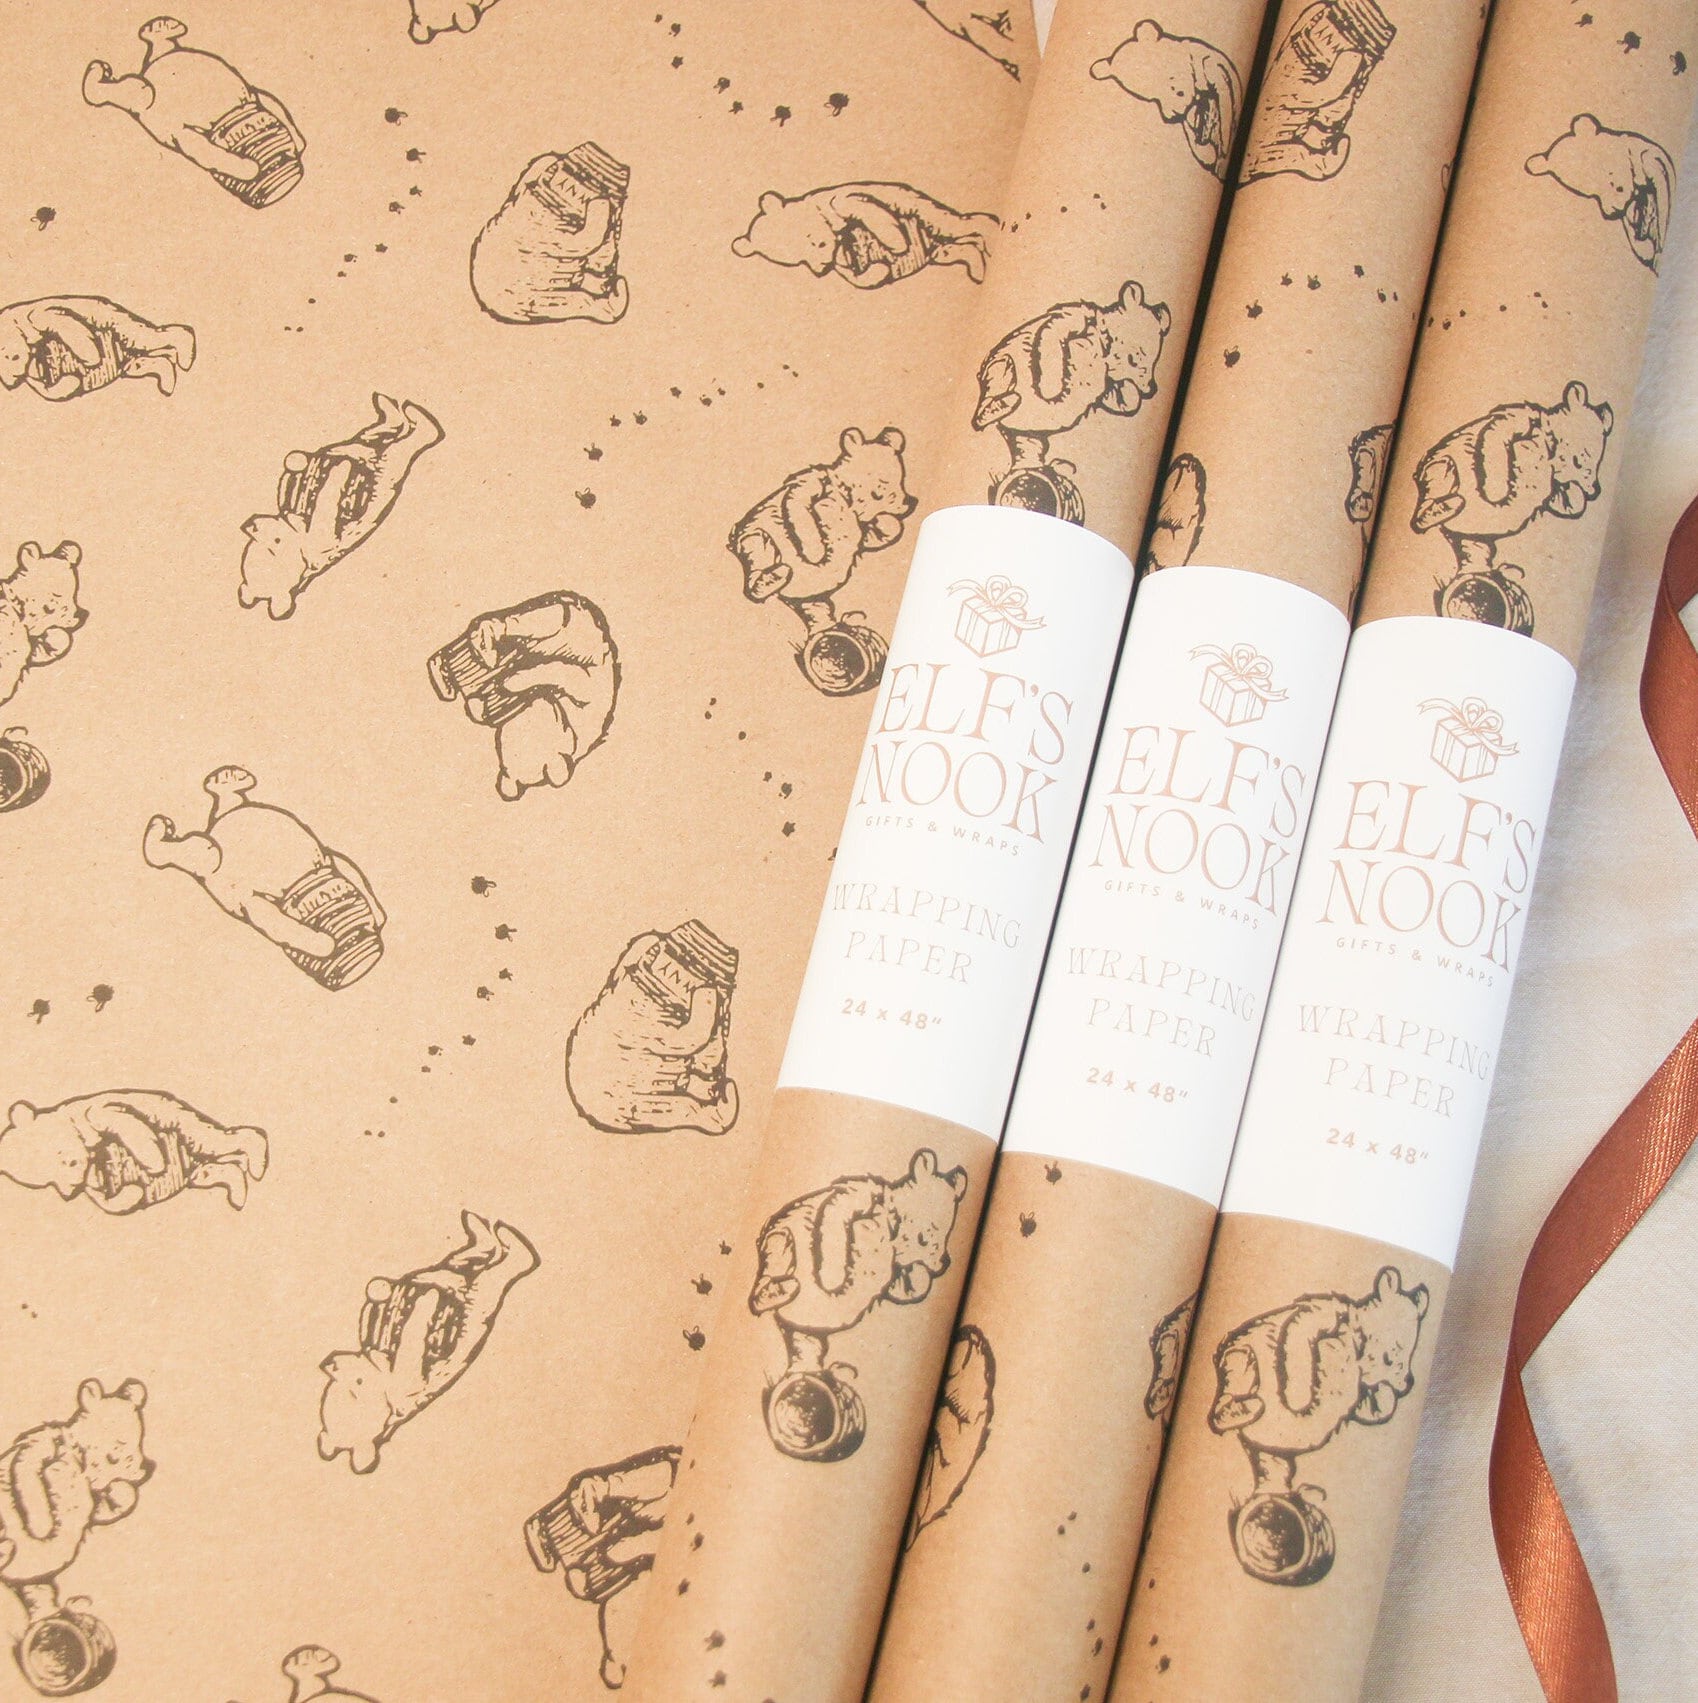 Winnie the Pooh Wrapping Paper